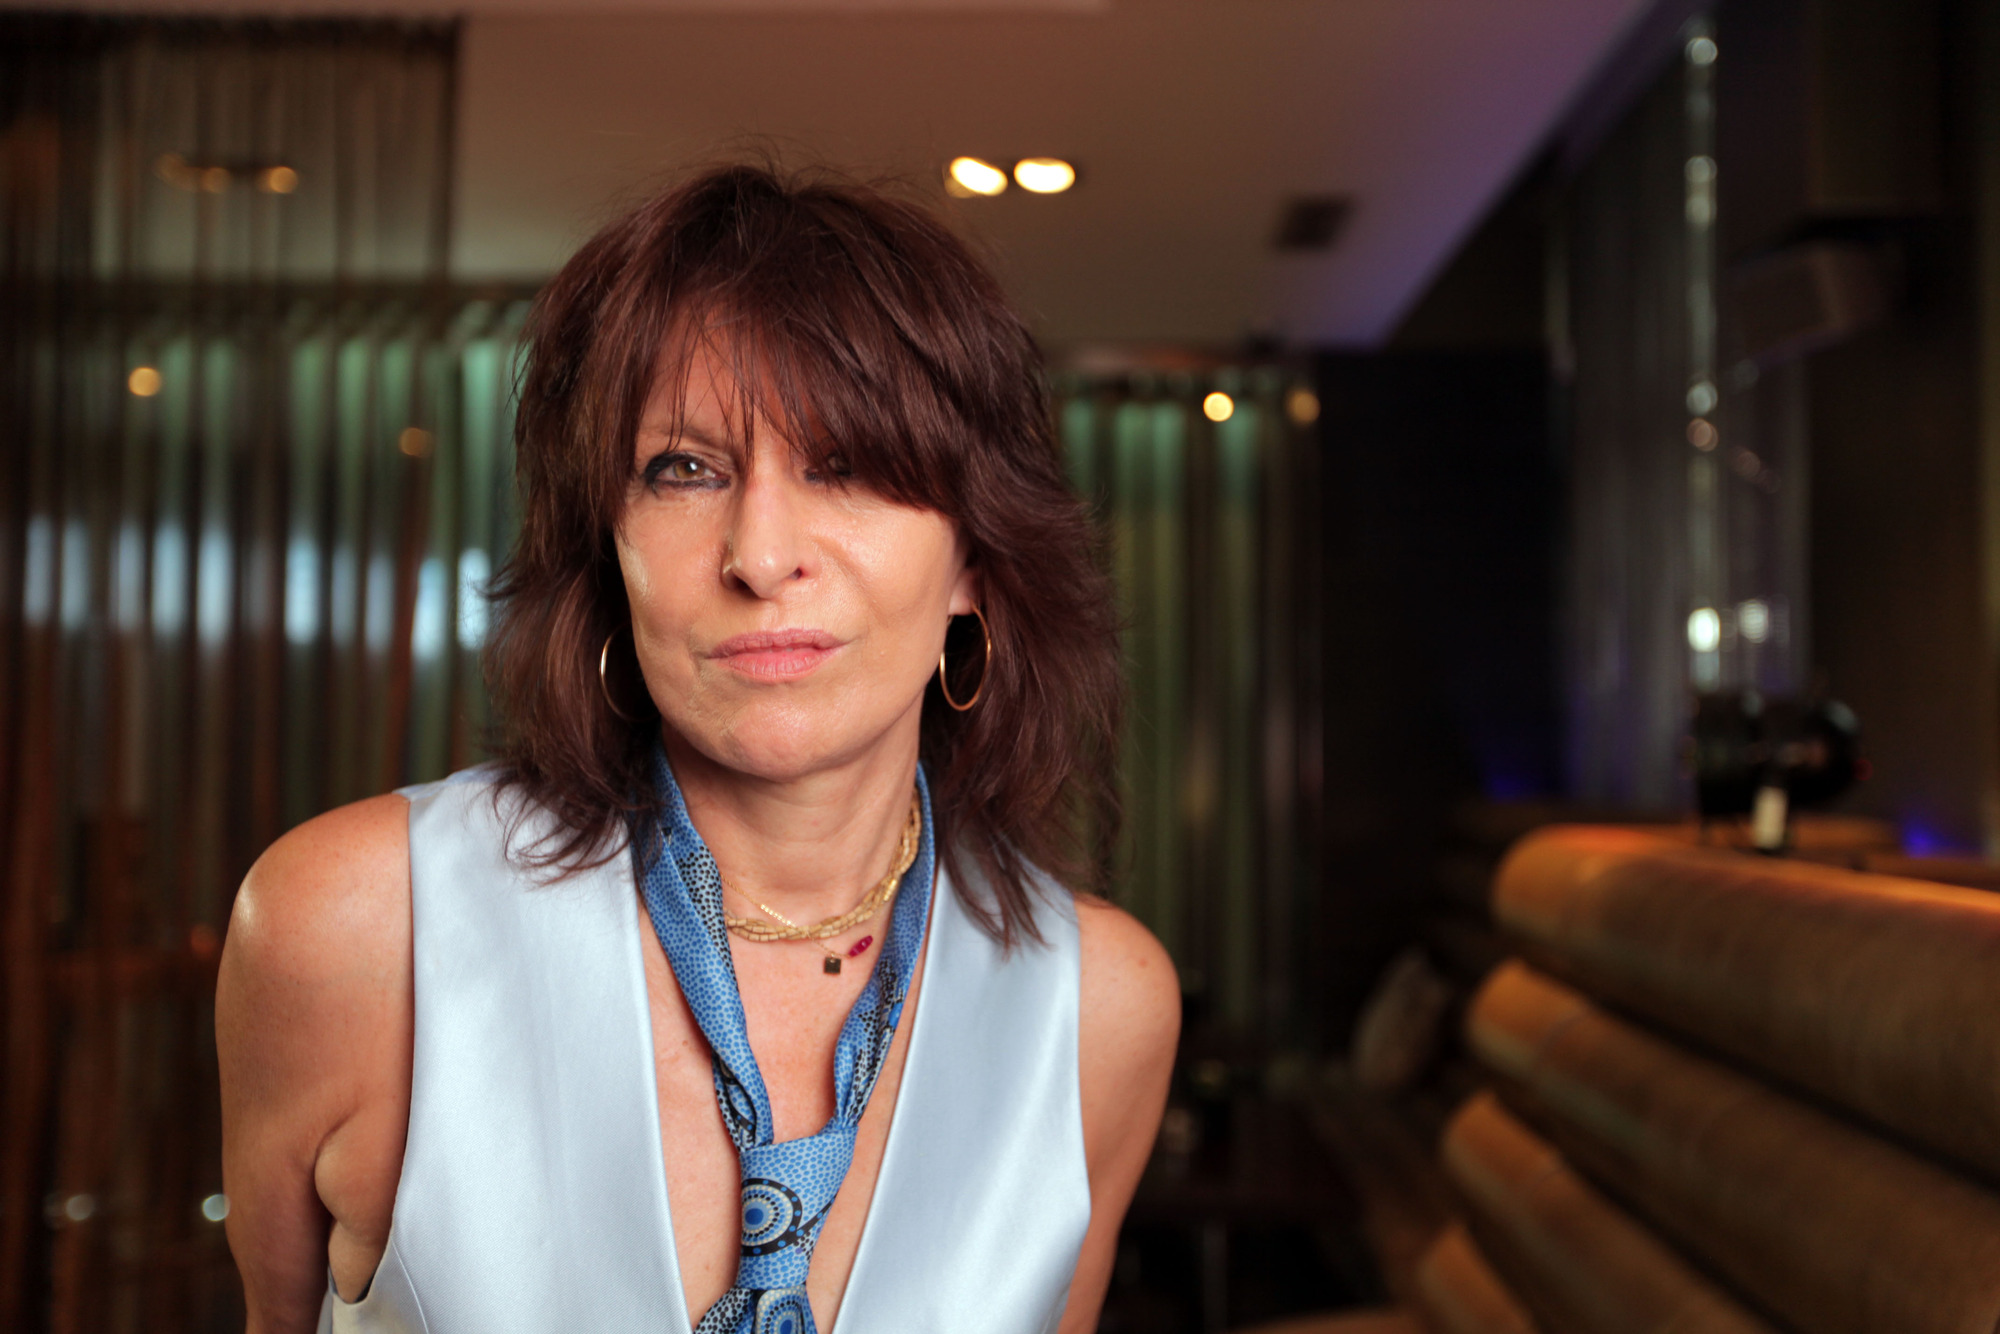 Chrissie Hynde in The Culture Show: Girls Will Be Girls